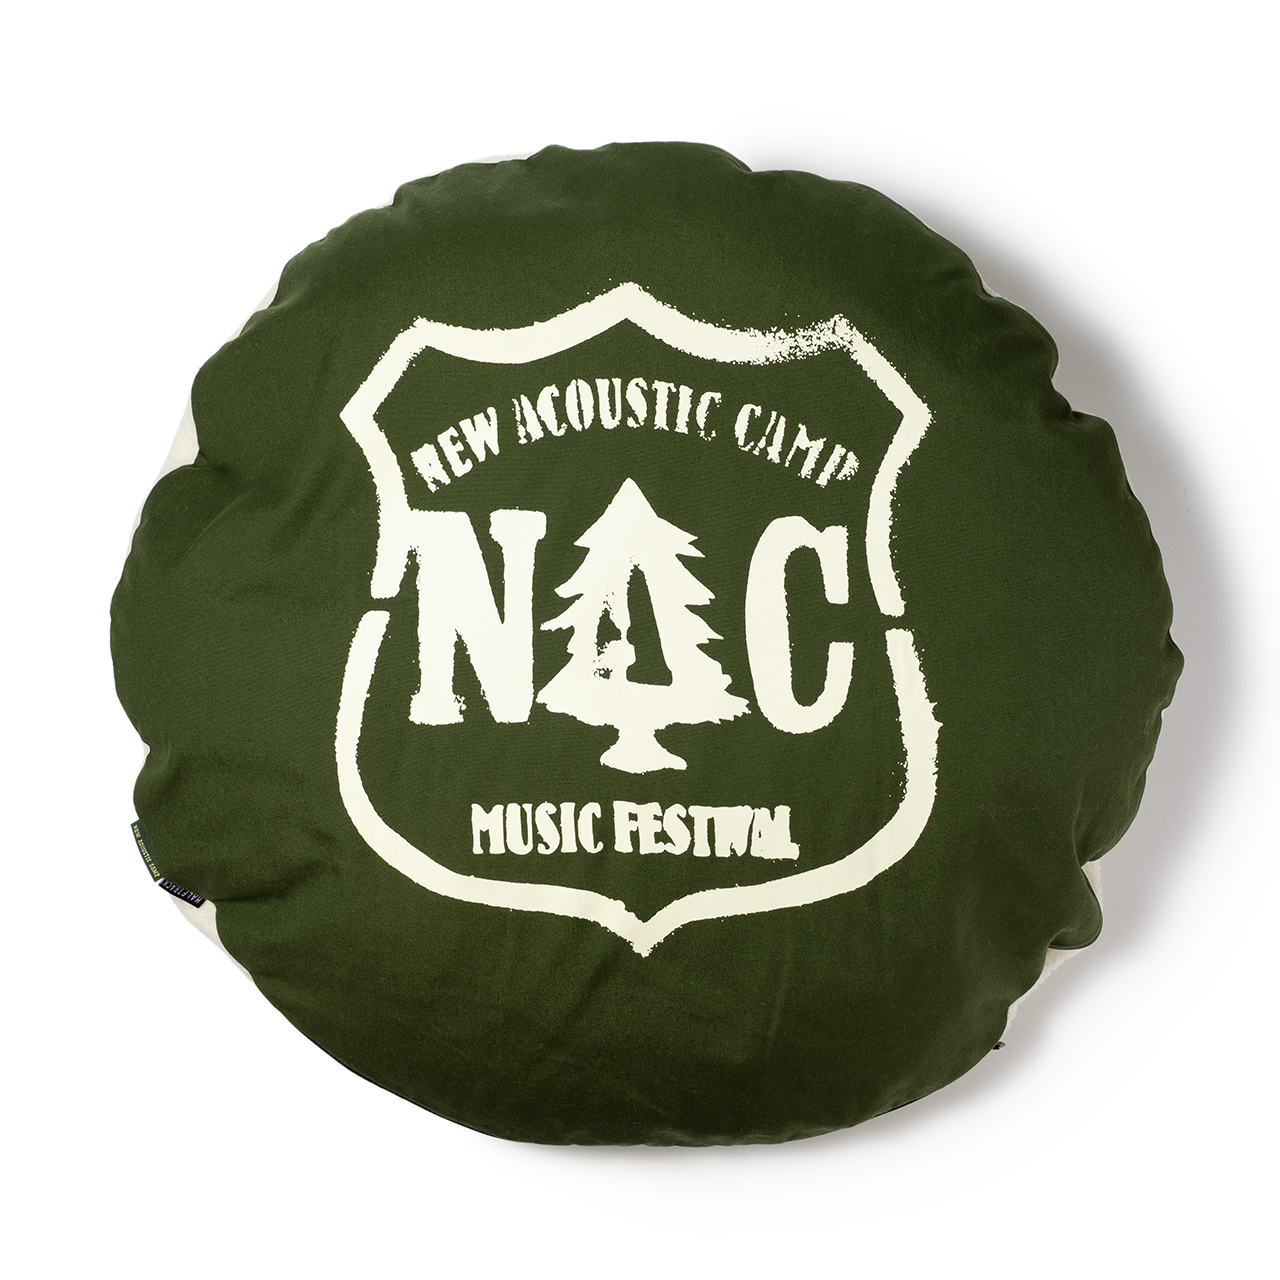 HALF TRACK PROCUCTS×NAC]ノンスリープクッション | New Acoustic Camp 